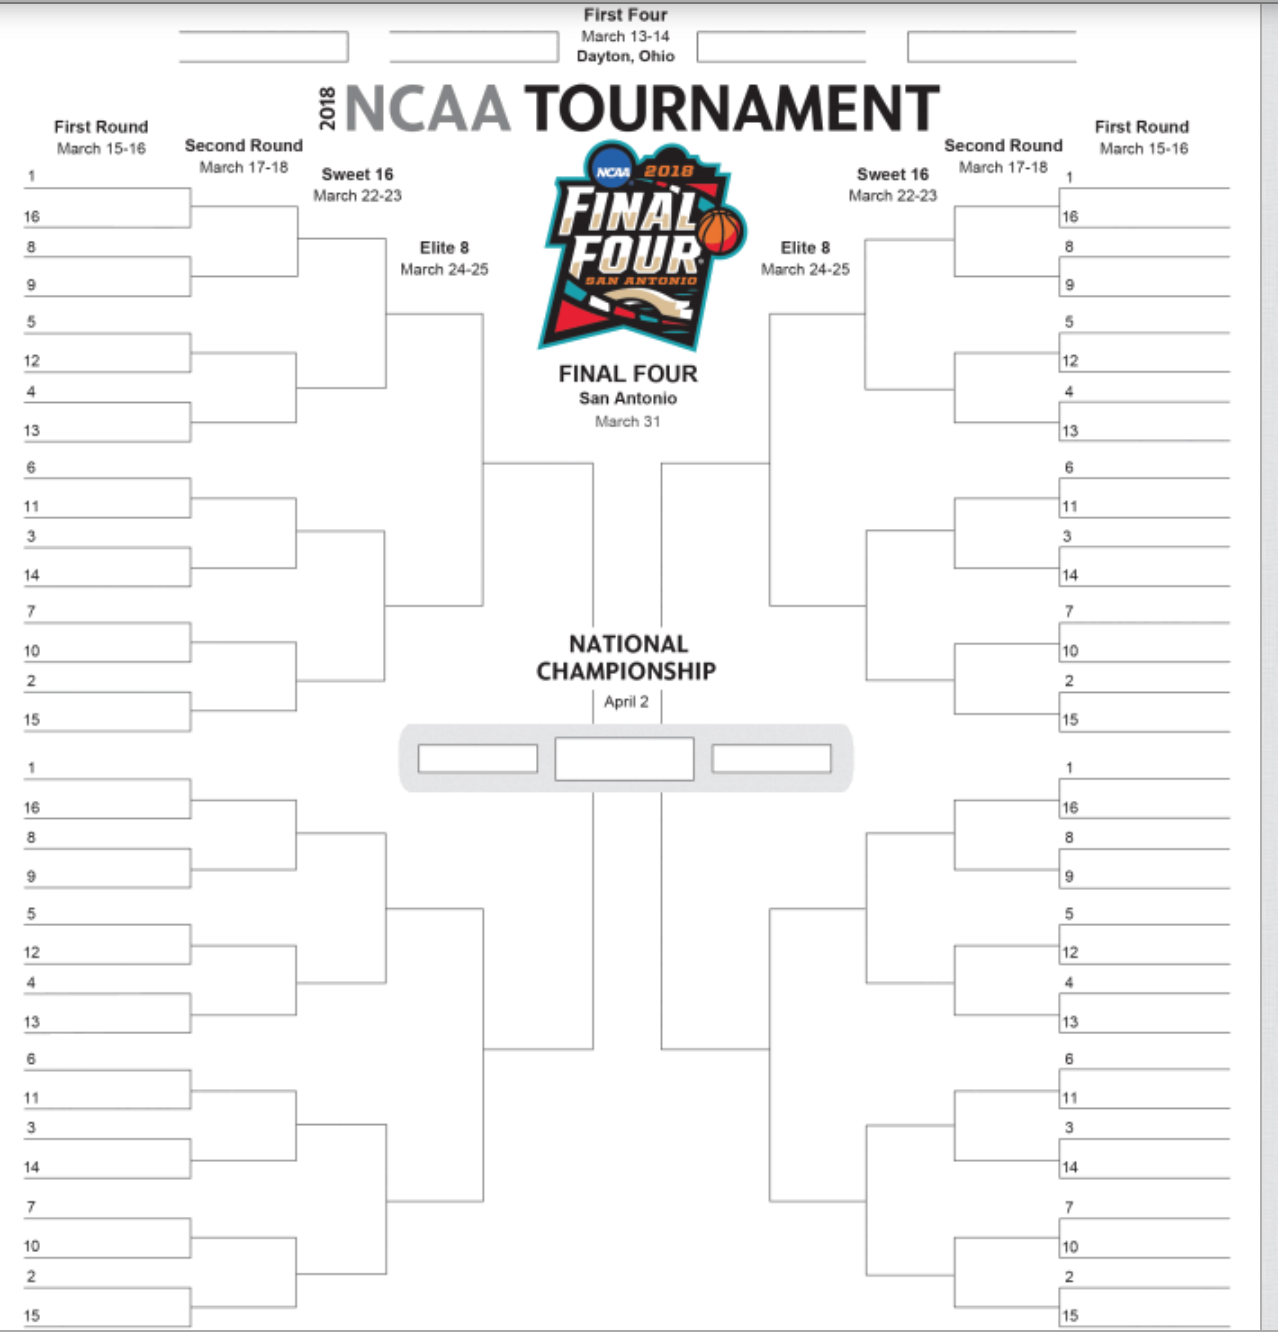 Get Your Printable NCAA Tournament Bracket | Mountain West Wire